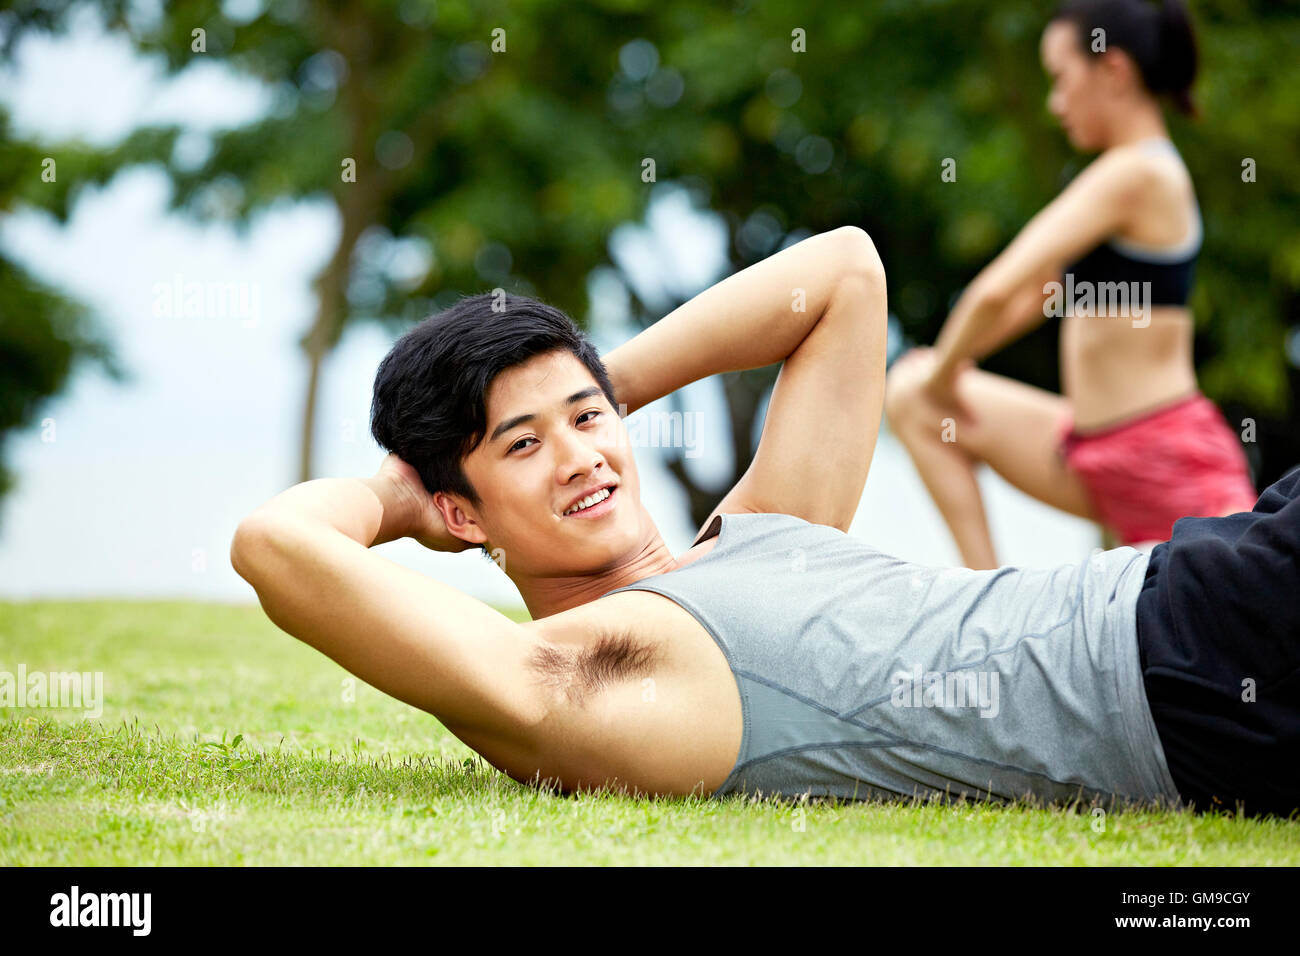 young asian man doing sit-ups on grass in city park. Stock Photo